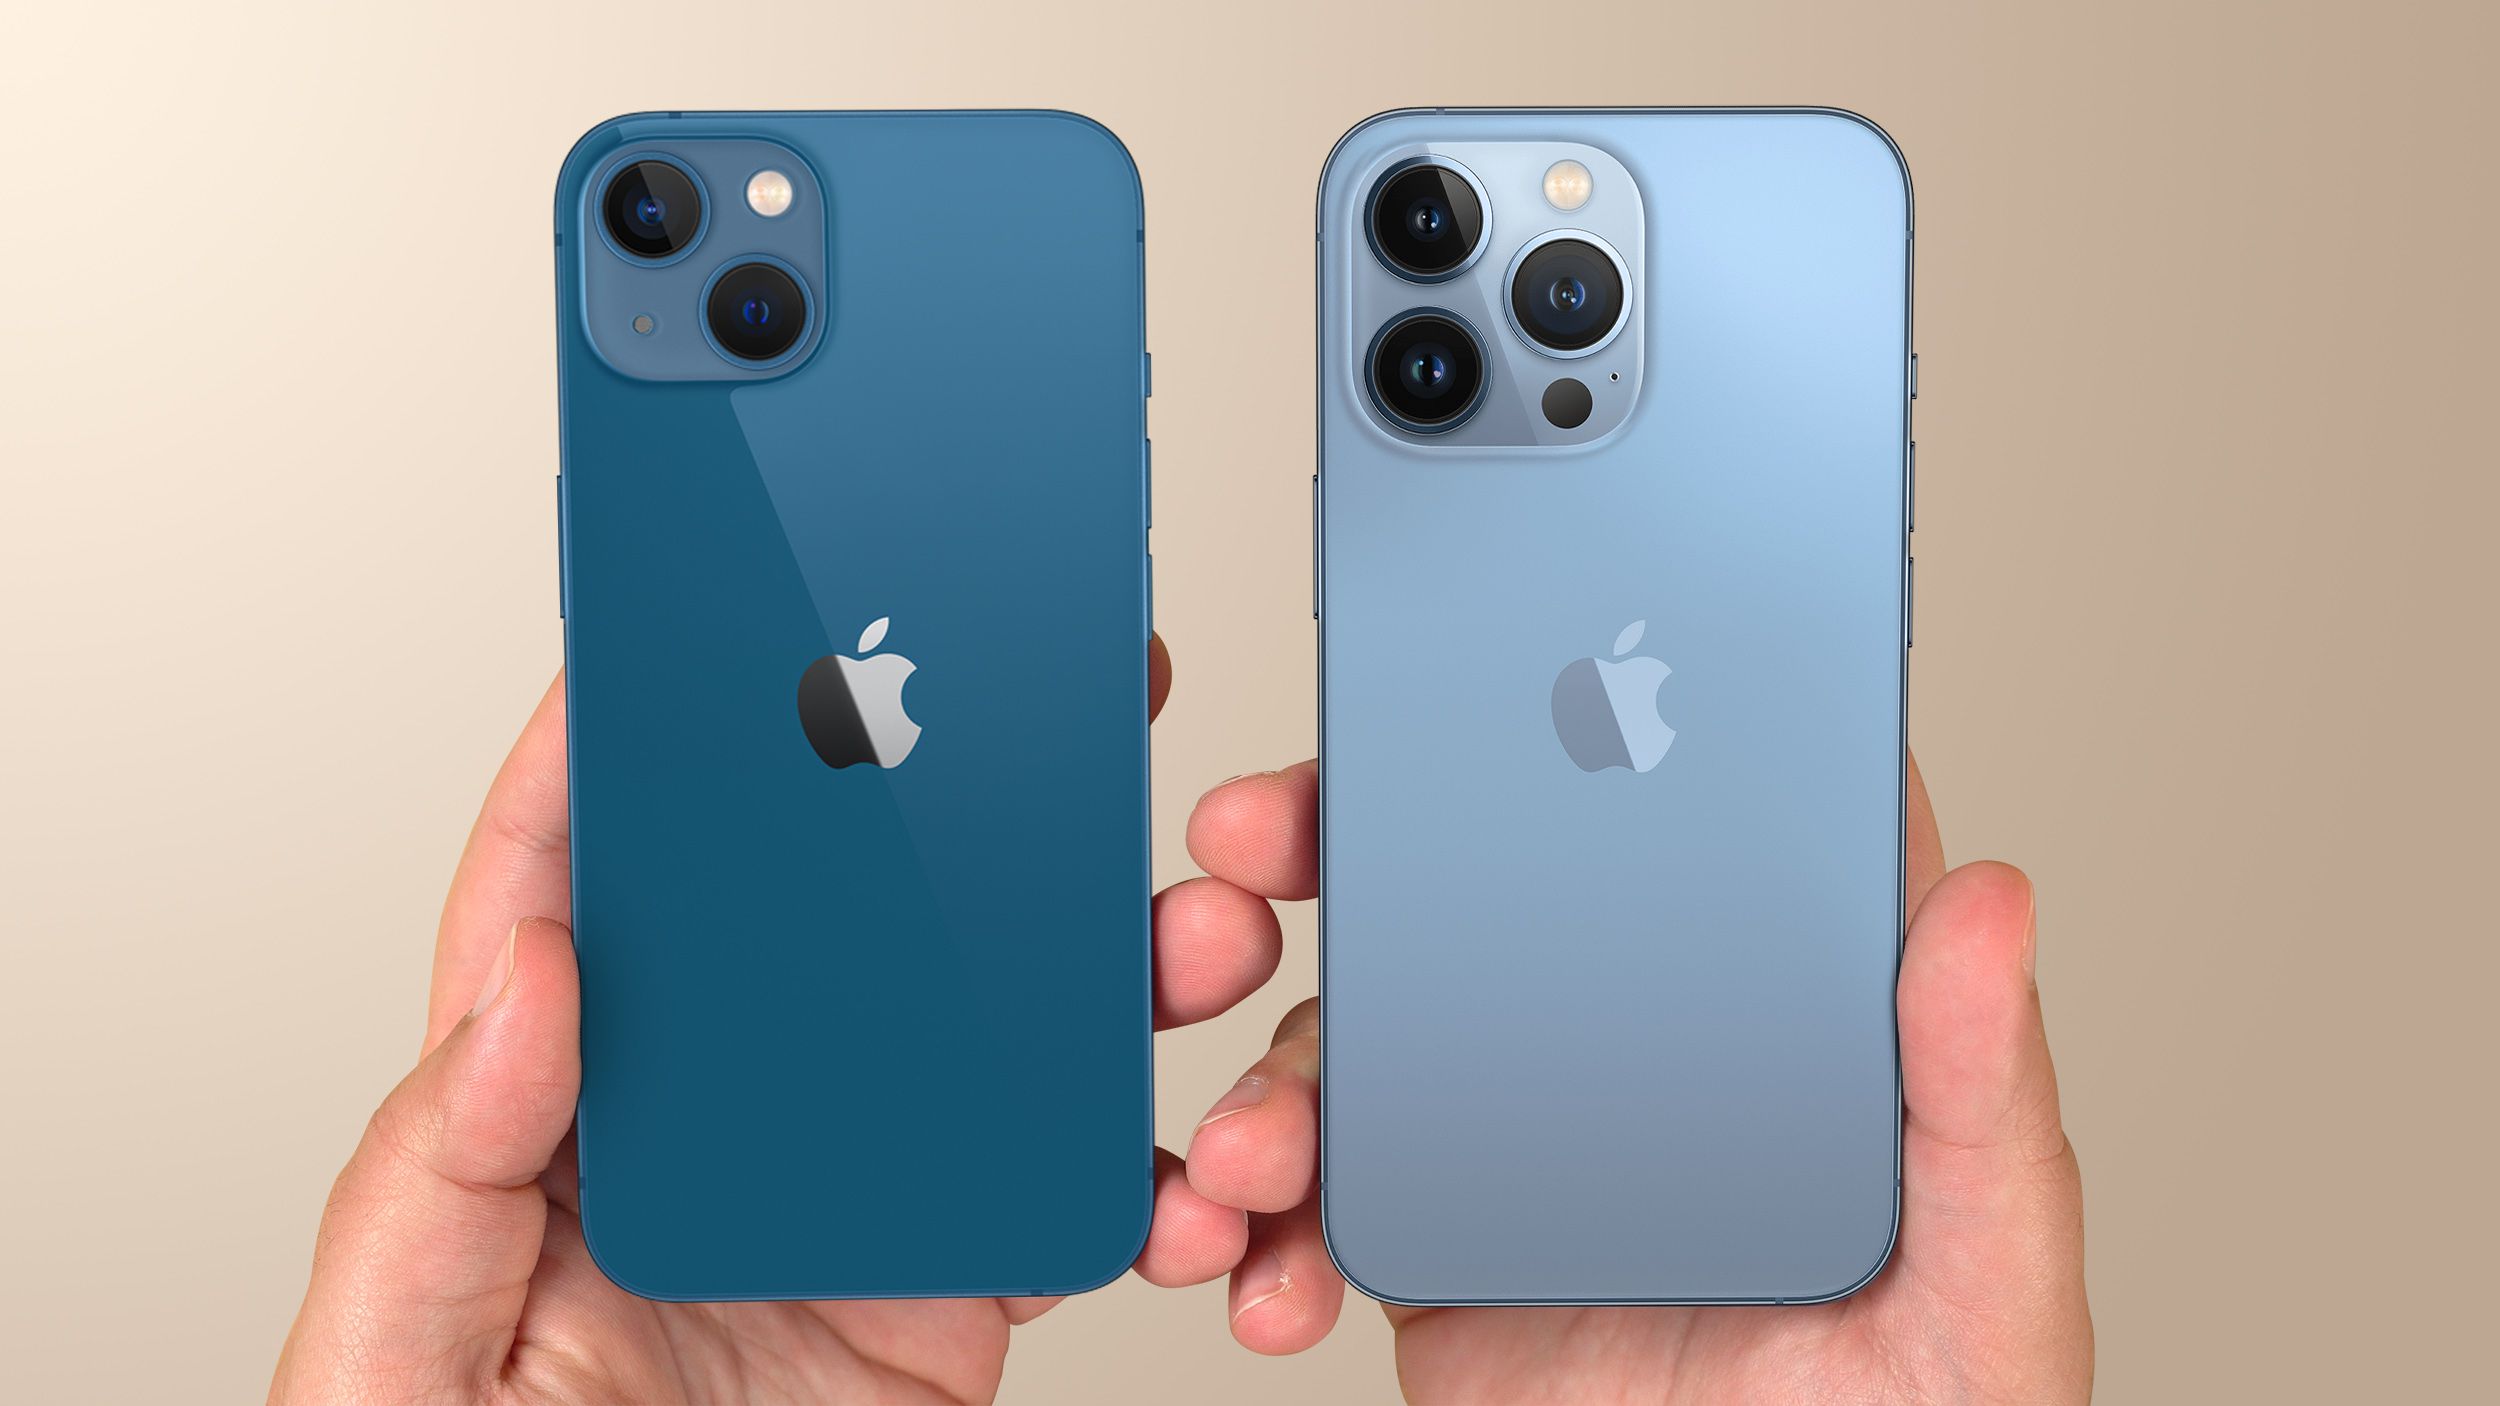 iPhone 13 and iPhone 13 Pro Unboxing Videos Shared Ahead of Friday's